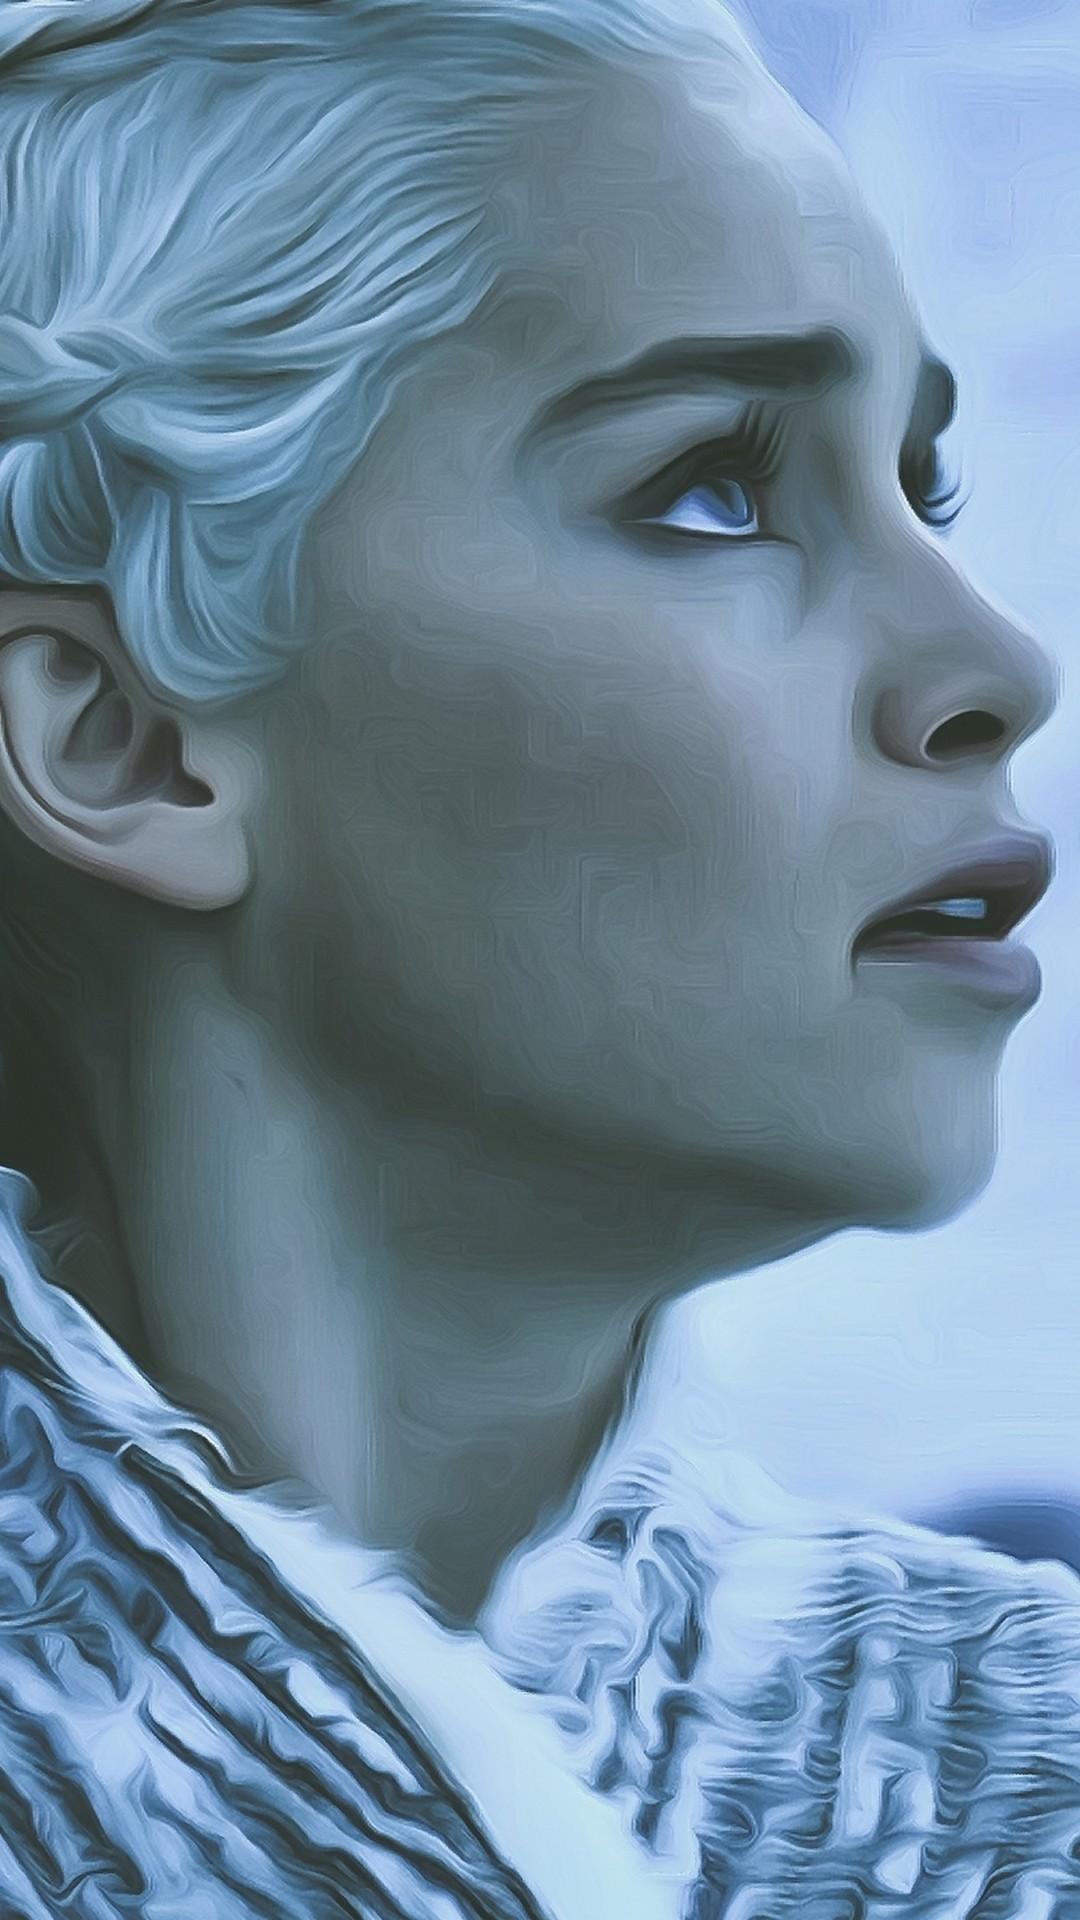 Game of Thrones 8 Season Android Wallpapers